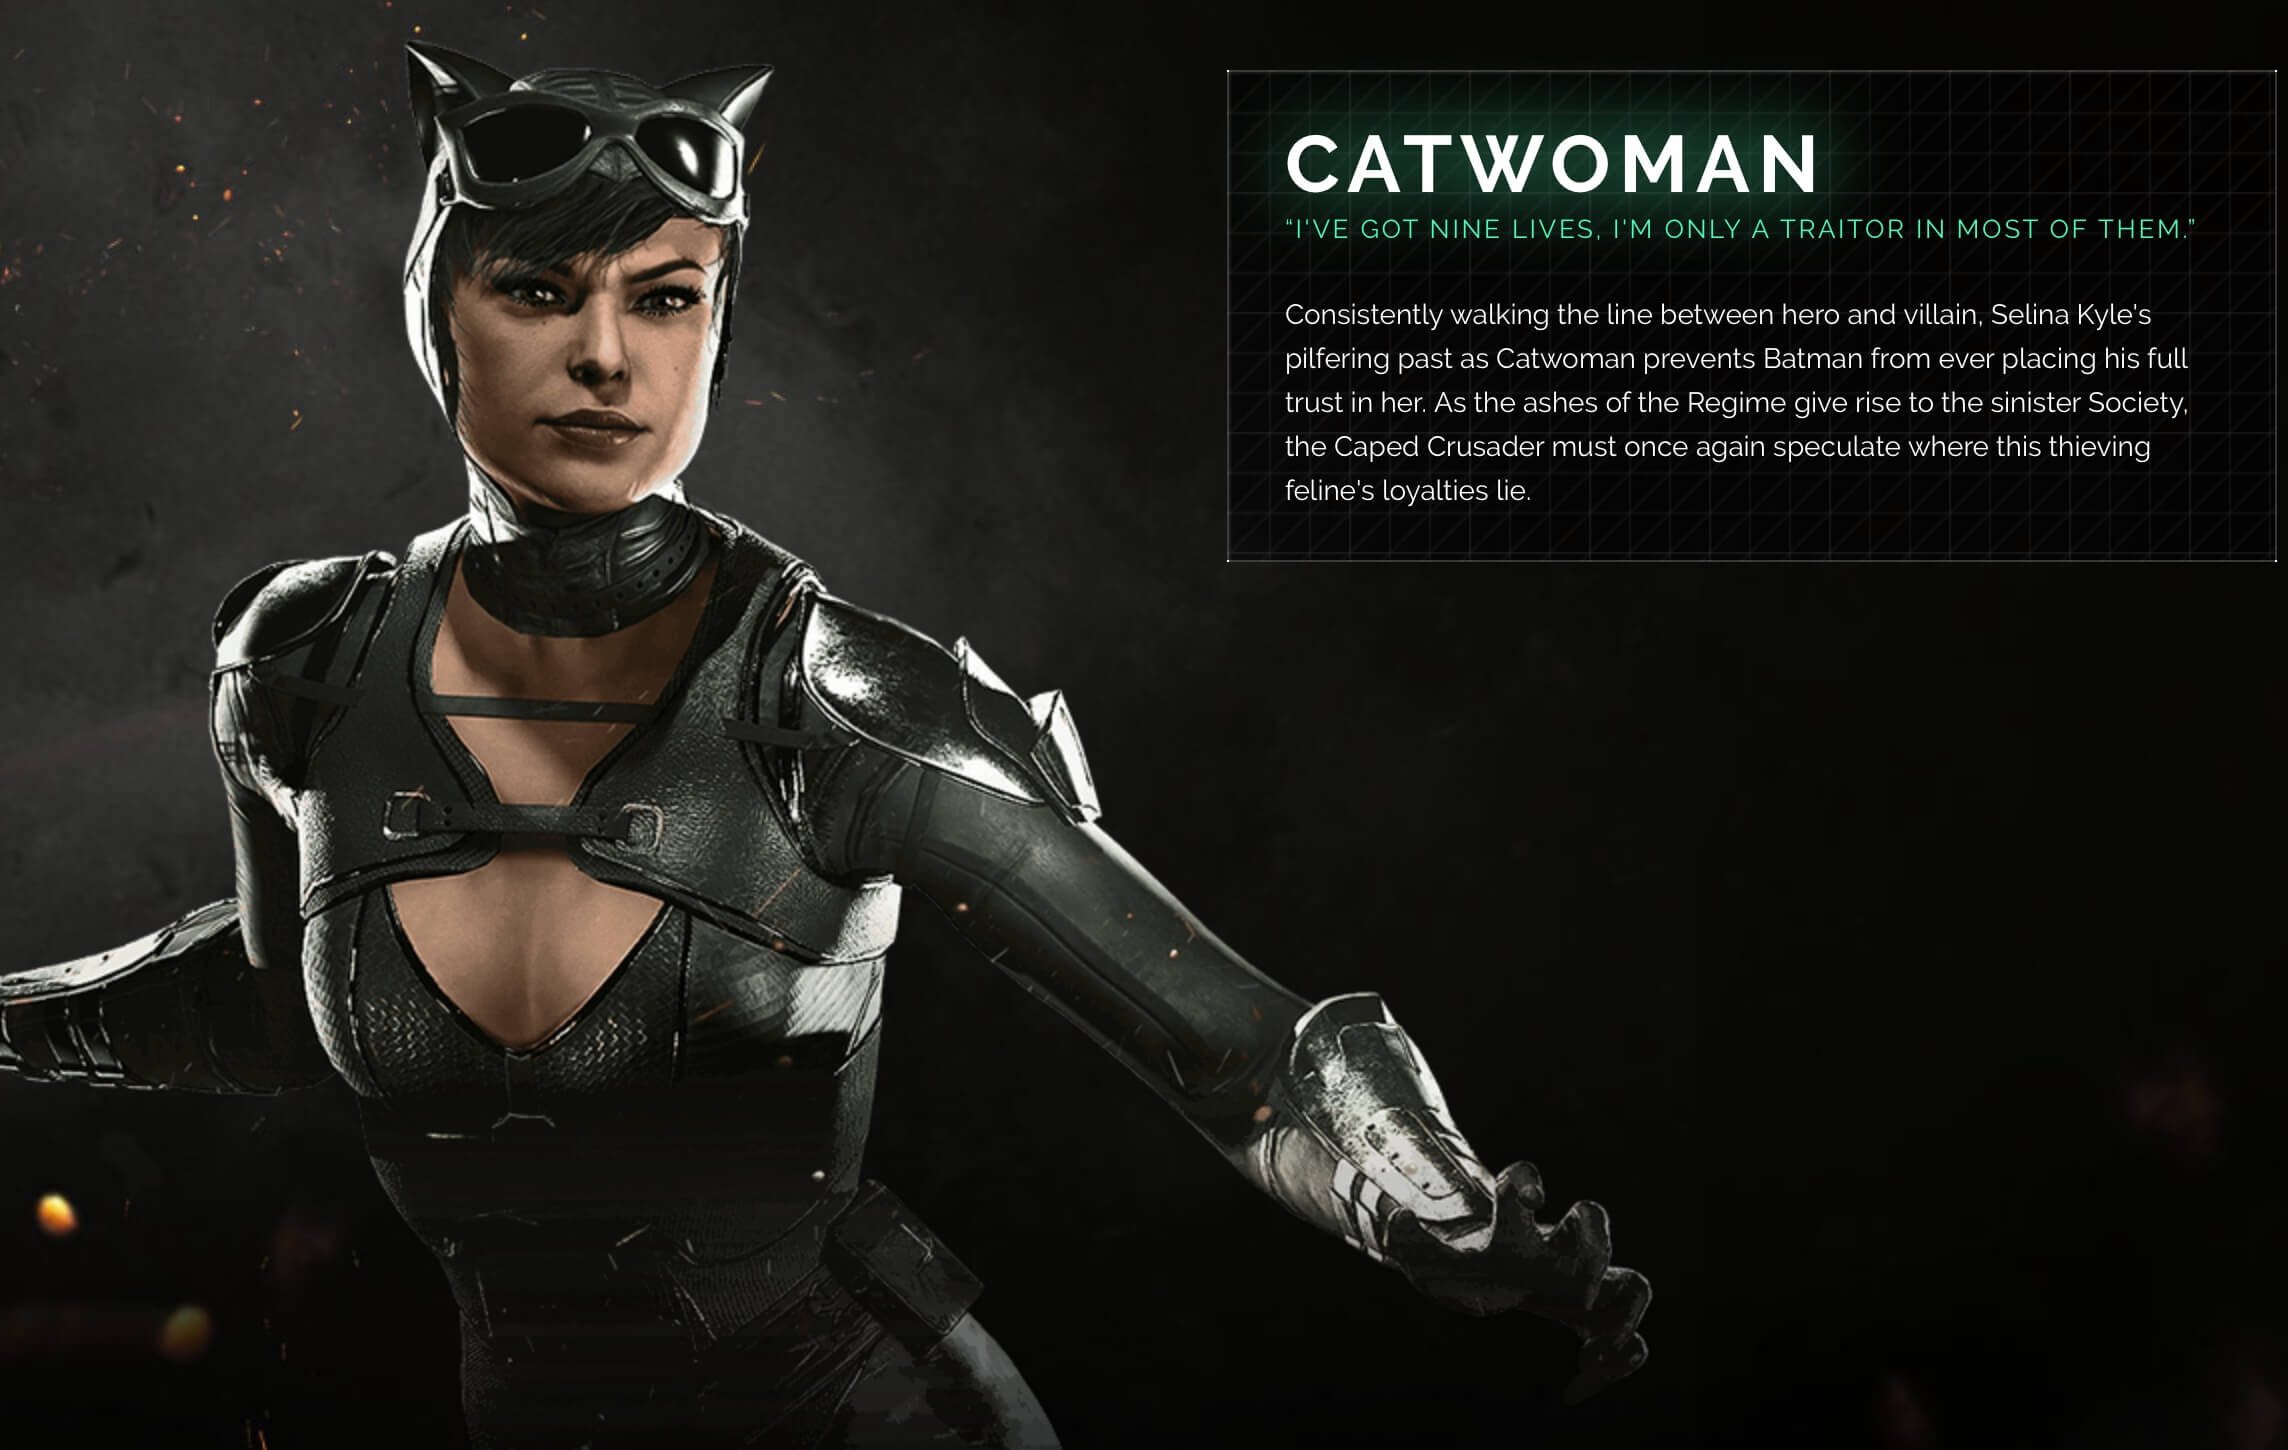 catwoman hunted